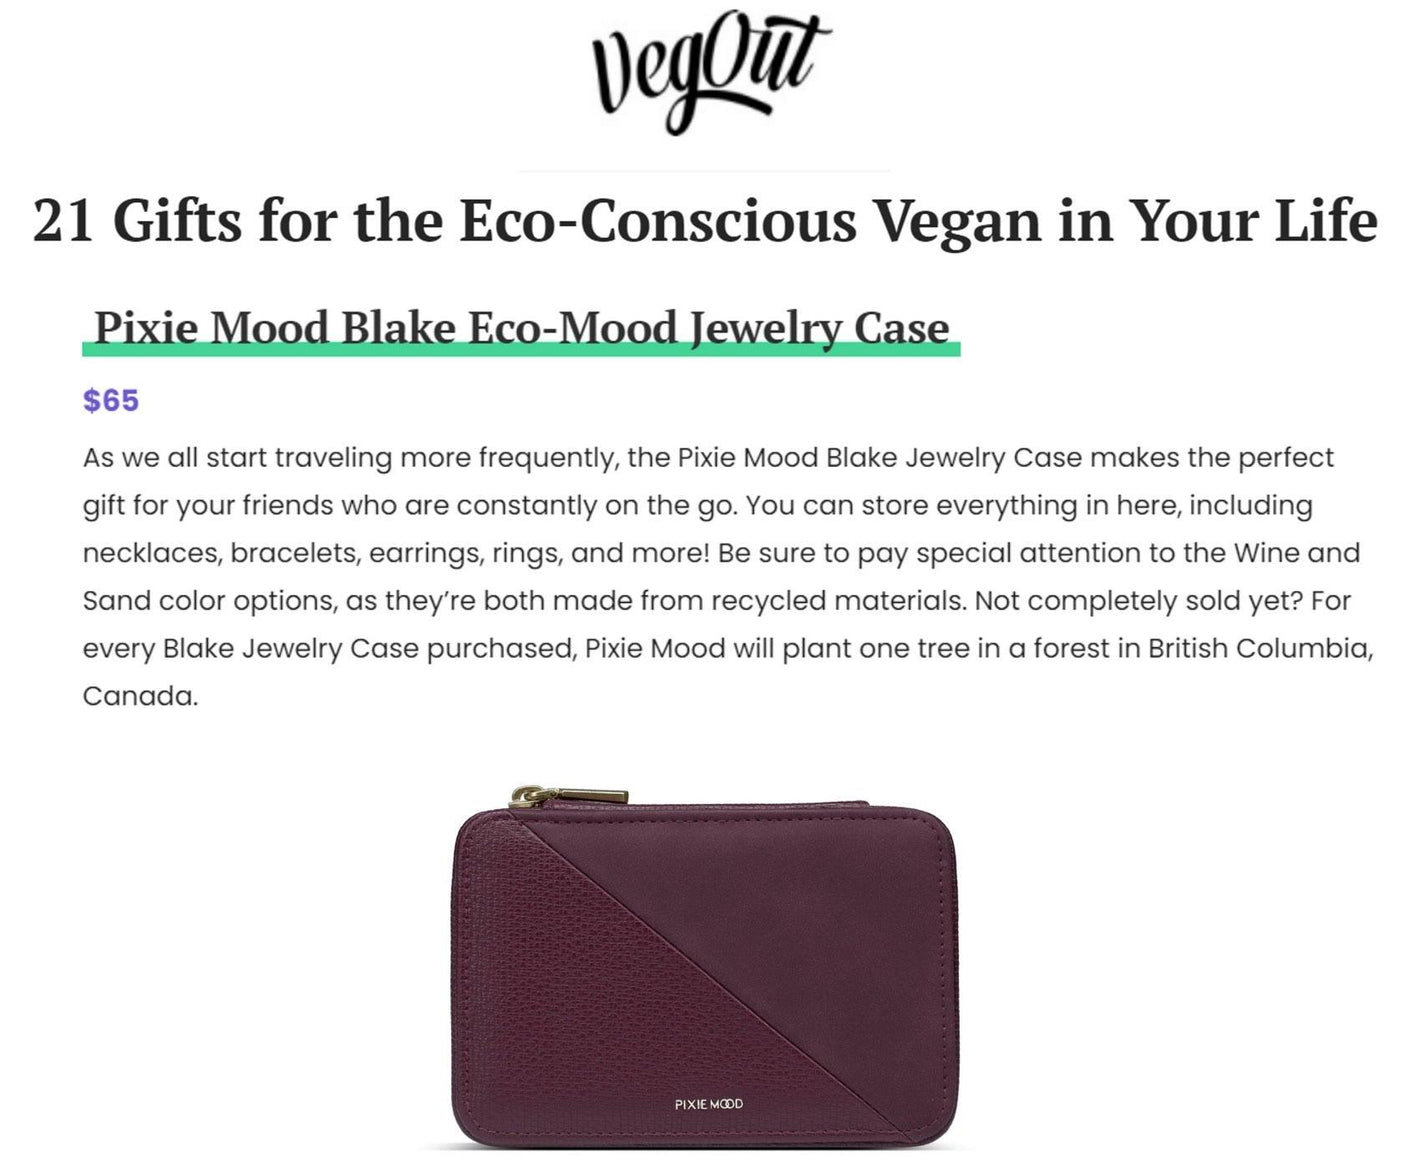 VegOut: 21 Gifts for the Eco-Conscious Vegan in Your Life - Pixie Mood Vegan Leather Bags